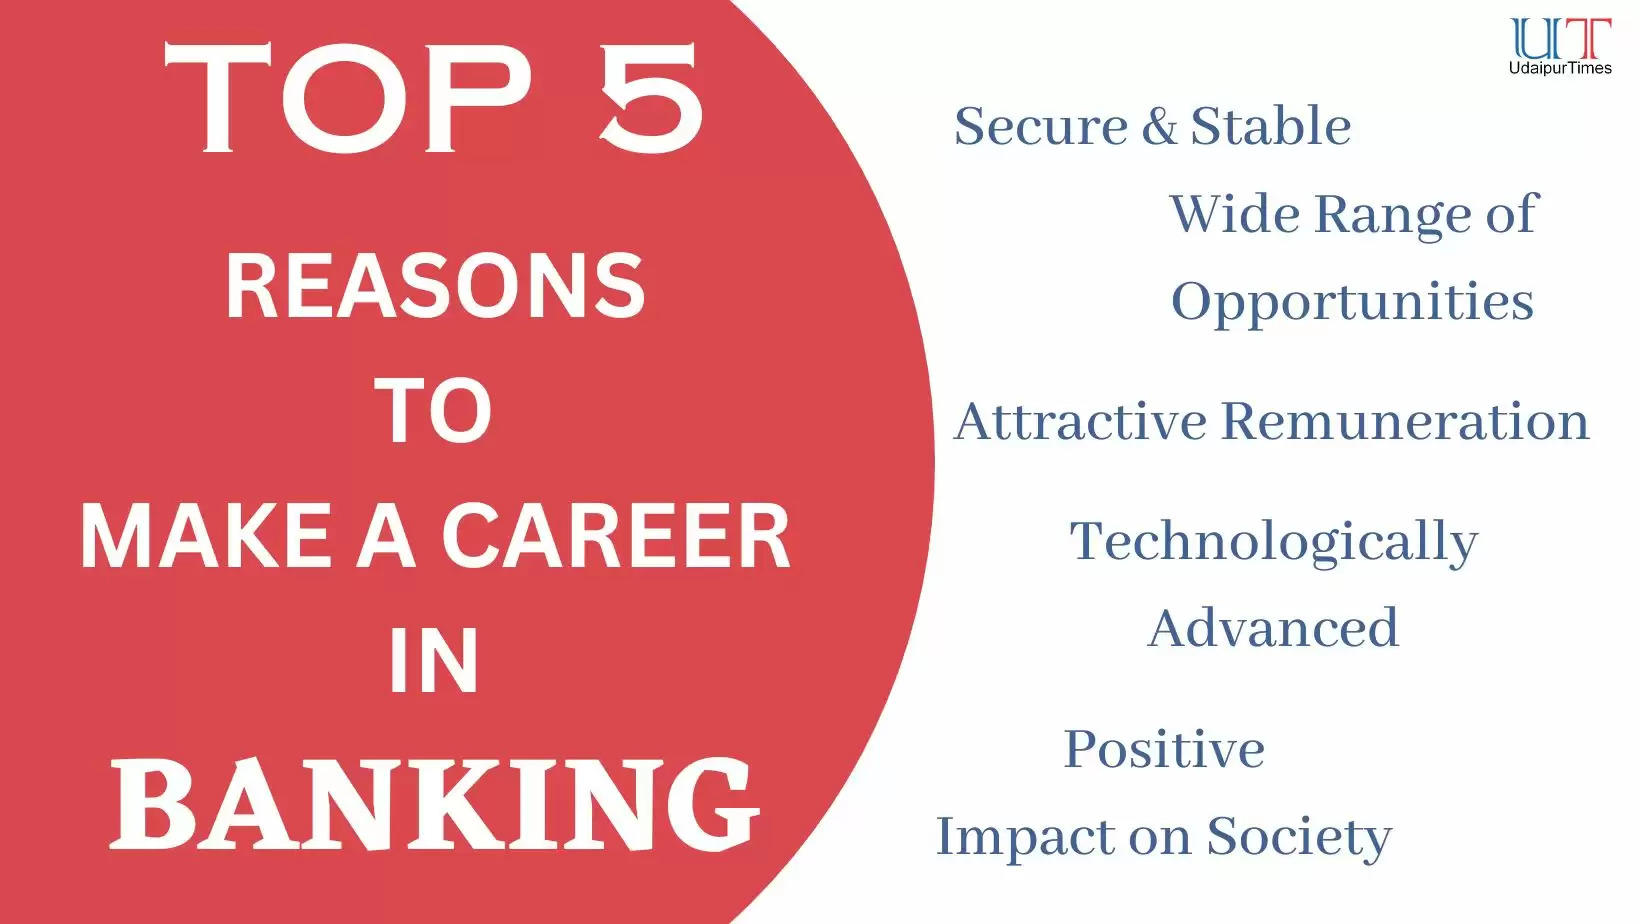 Career in Banking in India, why is a career in Banking important and beneficial in India